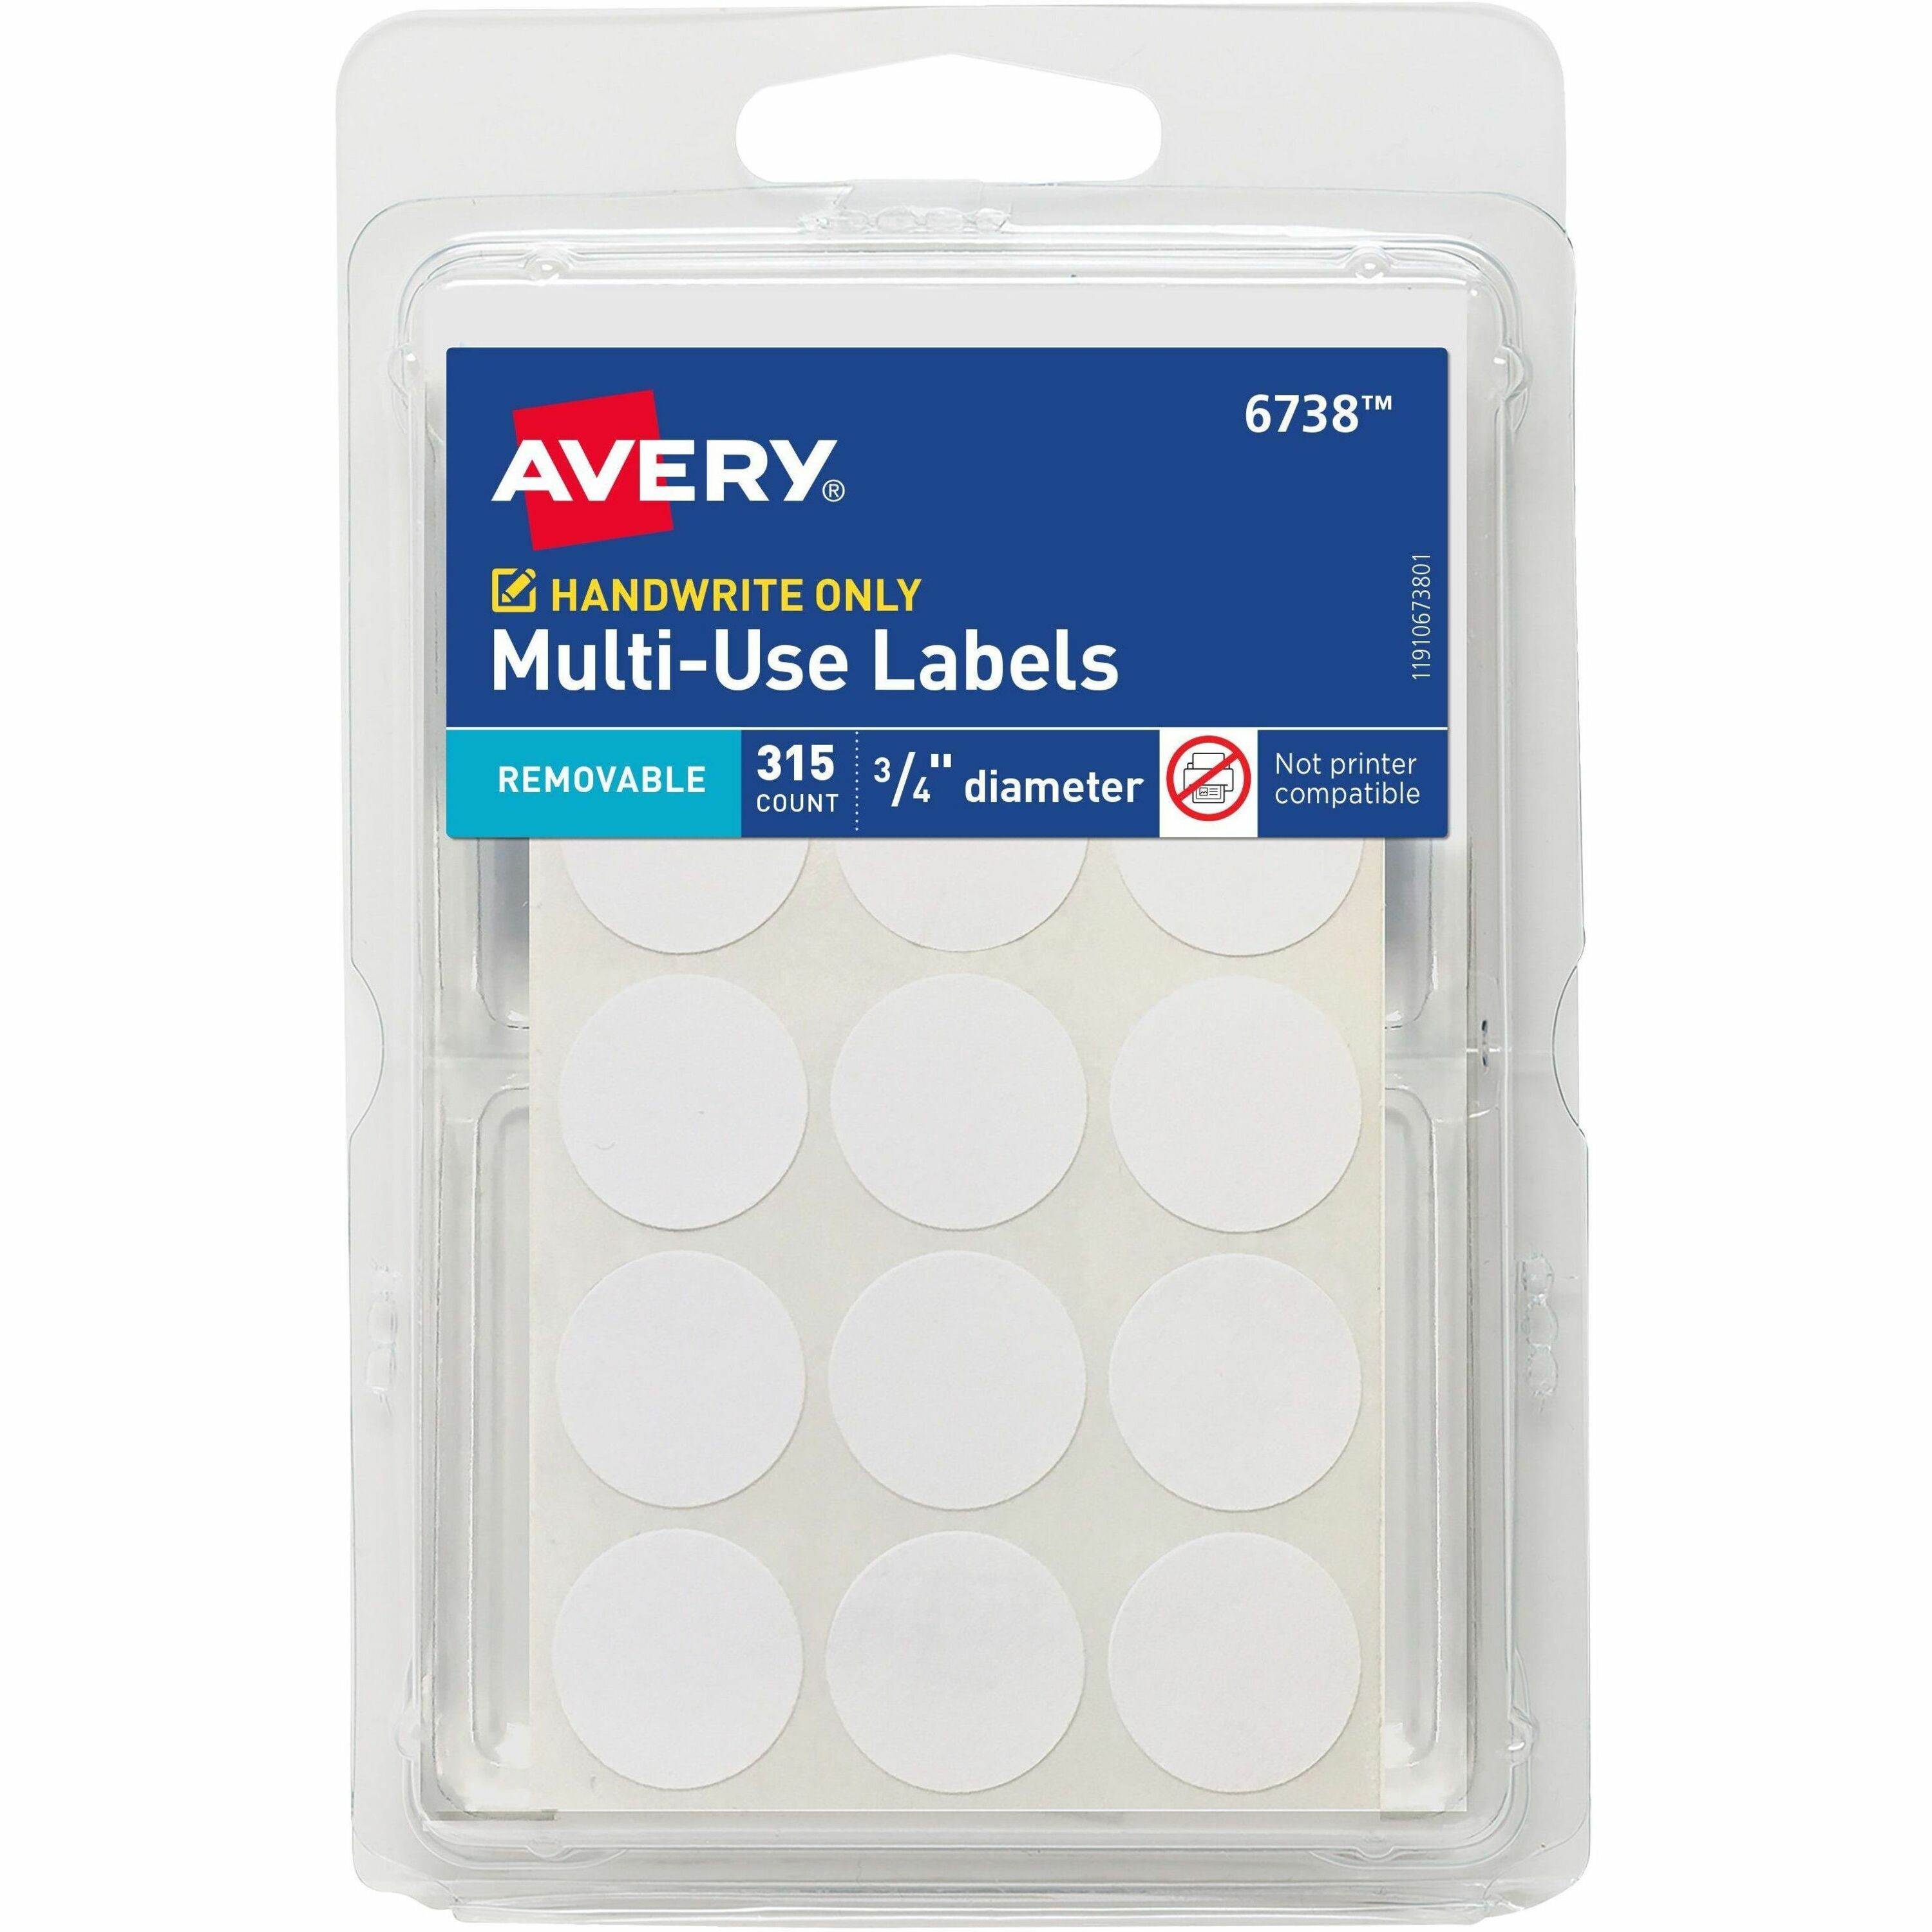  Sale Price Stickers - 2 Round Red Dot Stickers with Writable  Space - Price Label Stickers Sale Stickers Pricing Labels Price Stickers  for Retail - Adhesive Round Labels [300 Labels/Roll] : Office Products